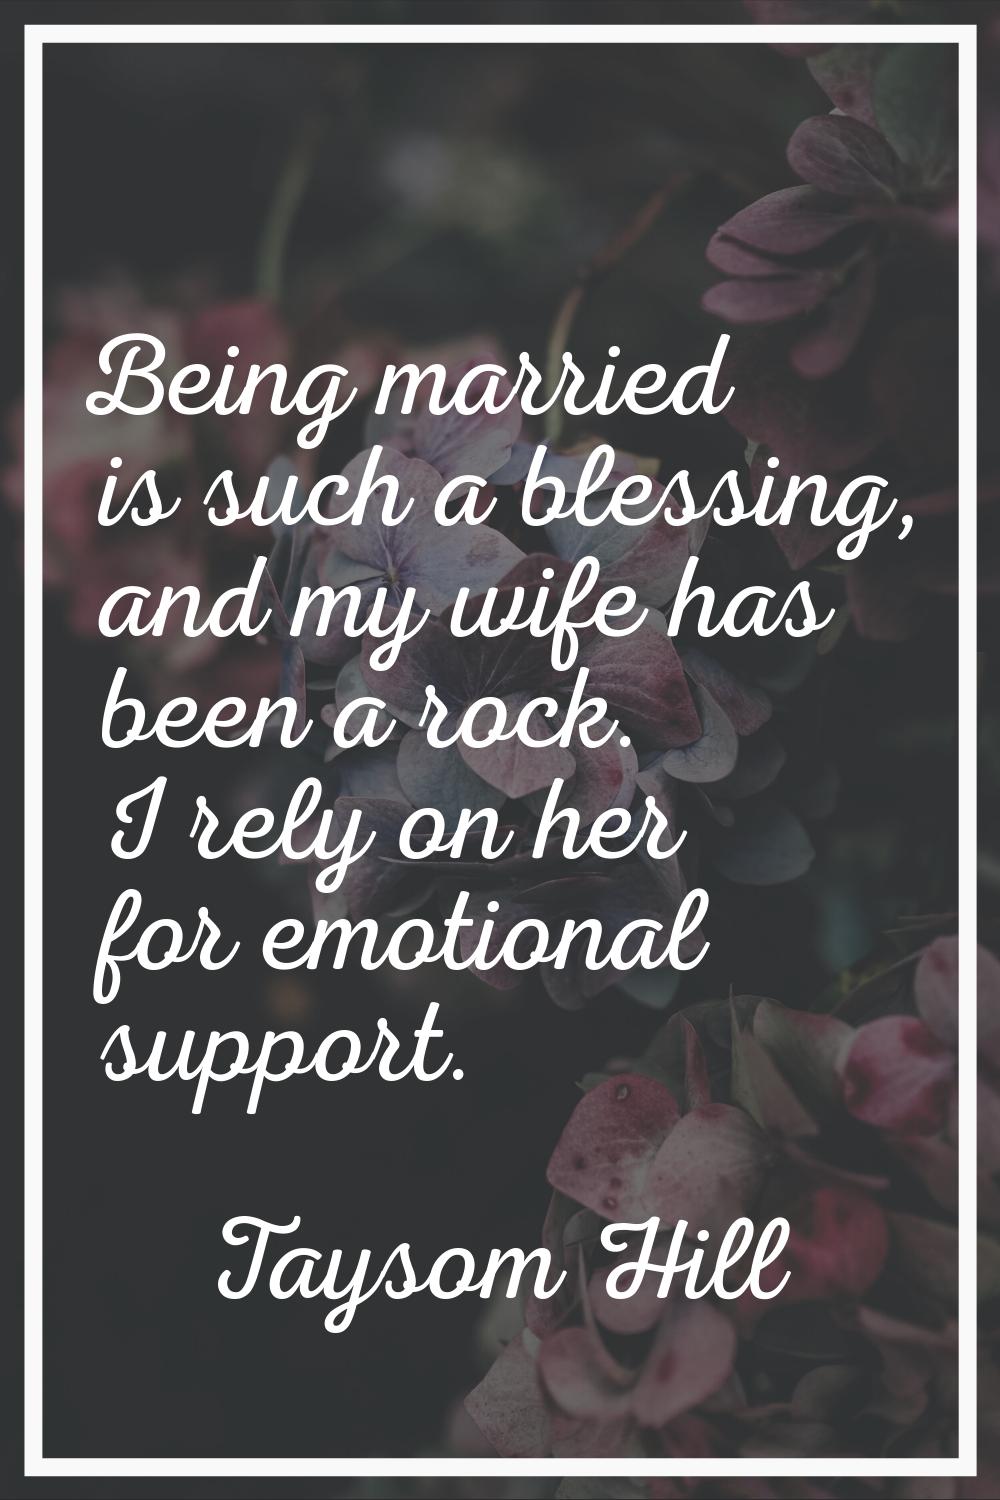 Being married is such a blessing, and my wife has been a rock. I rely on her for emotional support.